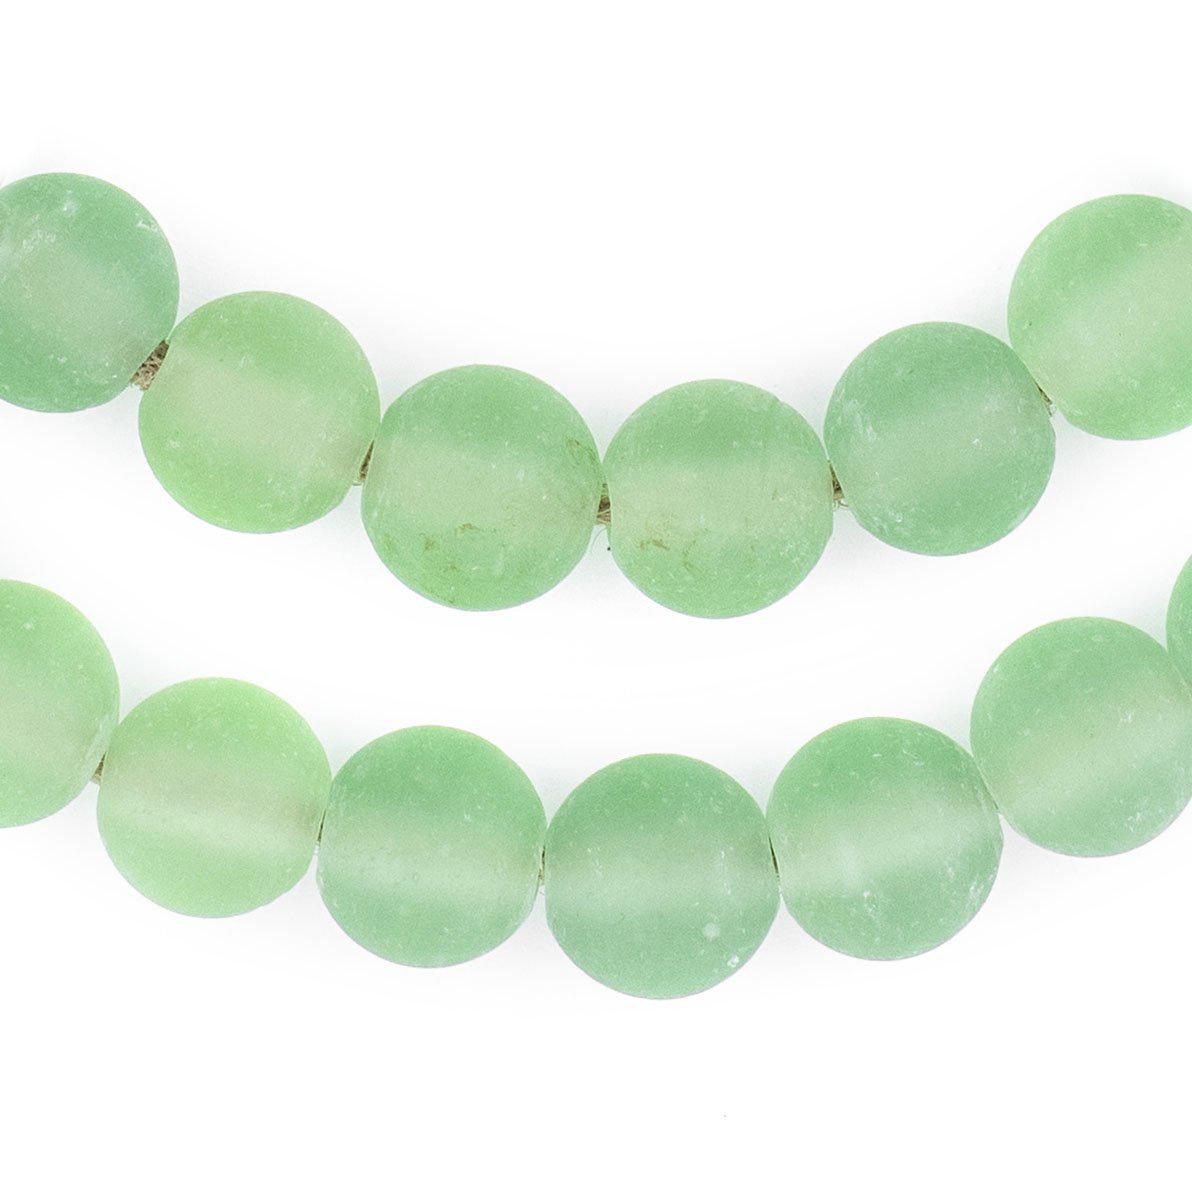 Green Frosted Sea Glass Beads 11mm Round Large Hole 24 Inch Strand